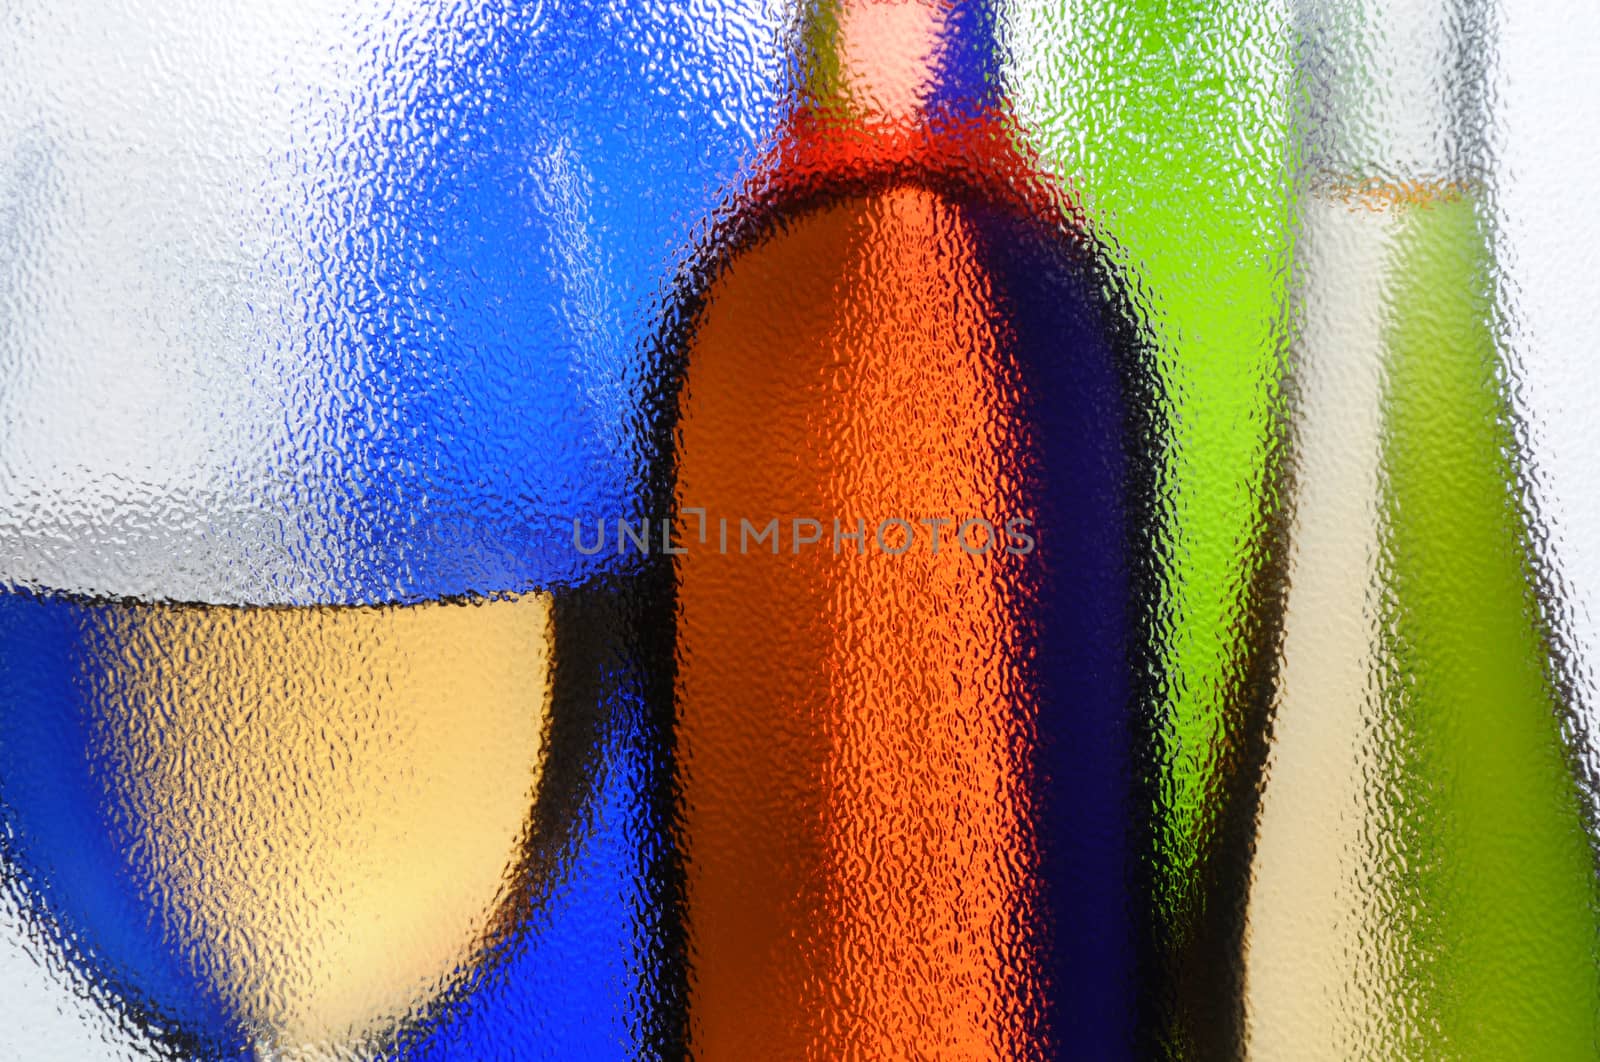 Wine Glass and Bottles Abstract by sCukrov